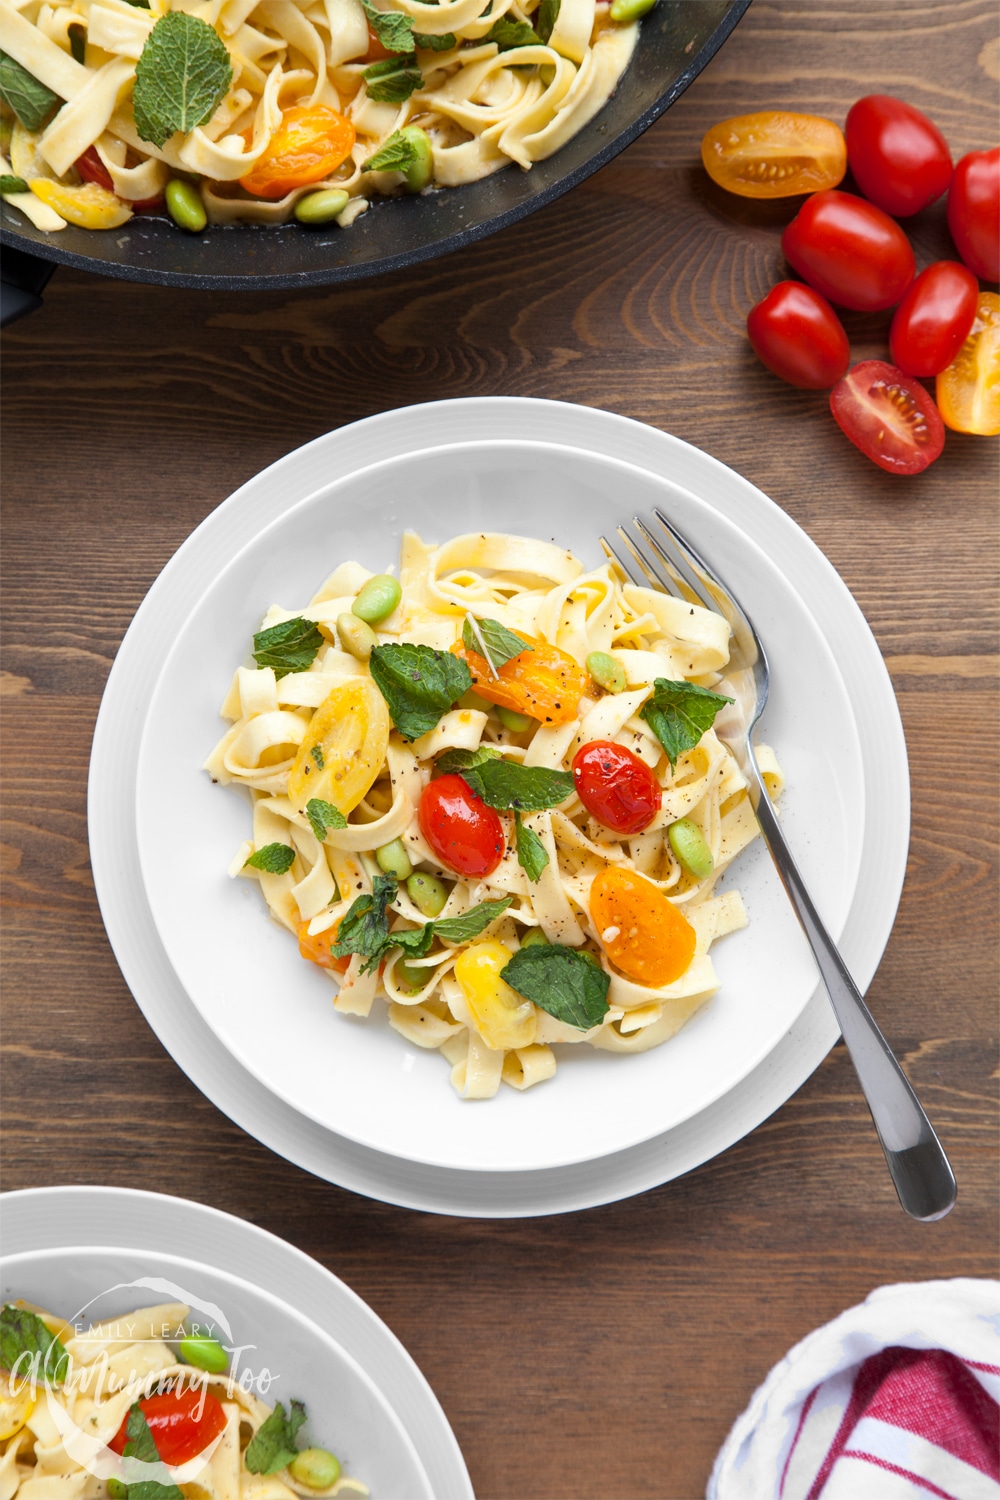 Tagliatelle with tricolour tomatoes, edamame and mint